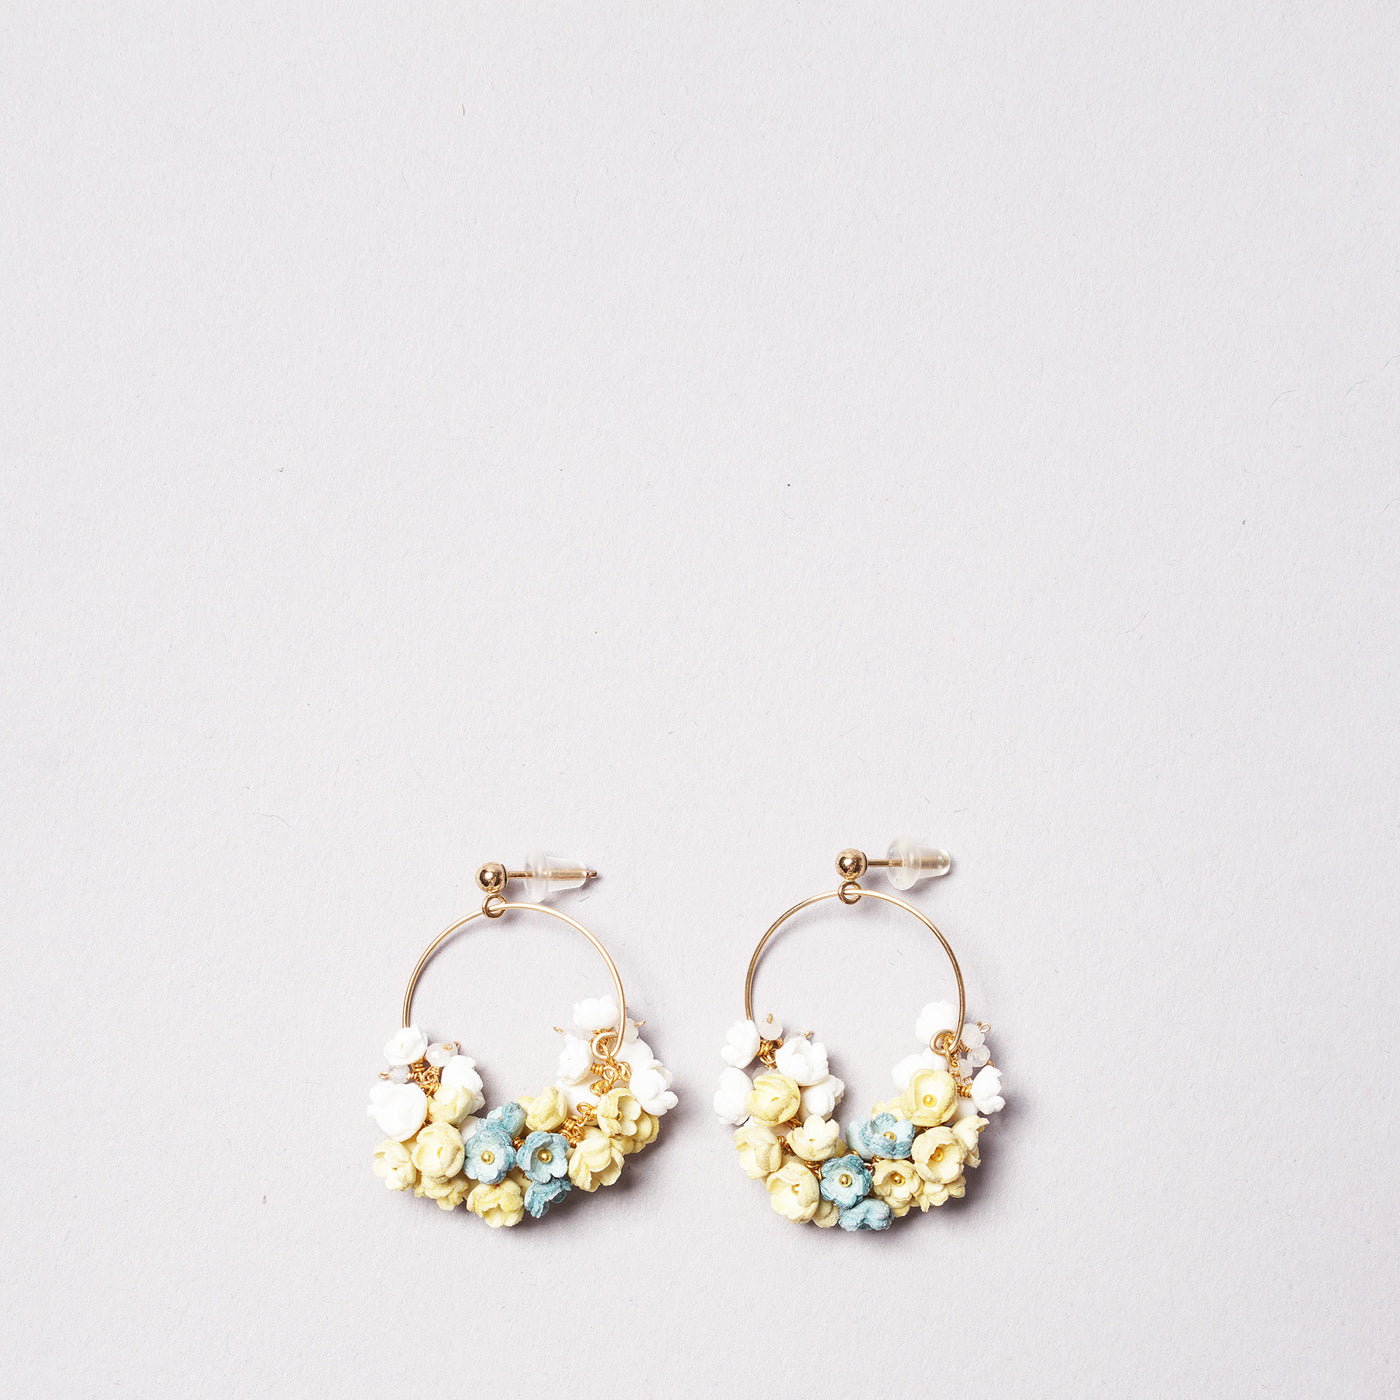 <Selieu>Mimosa Pierced Earrings, large/yellow, white and sky blue